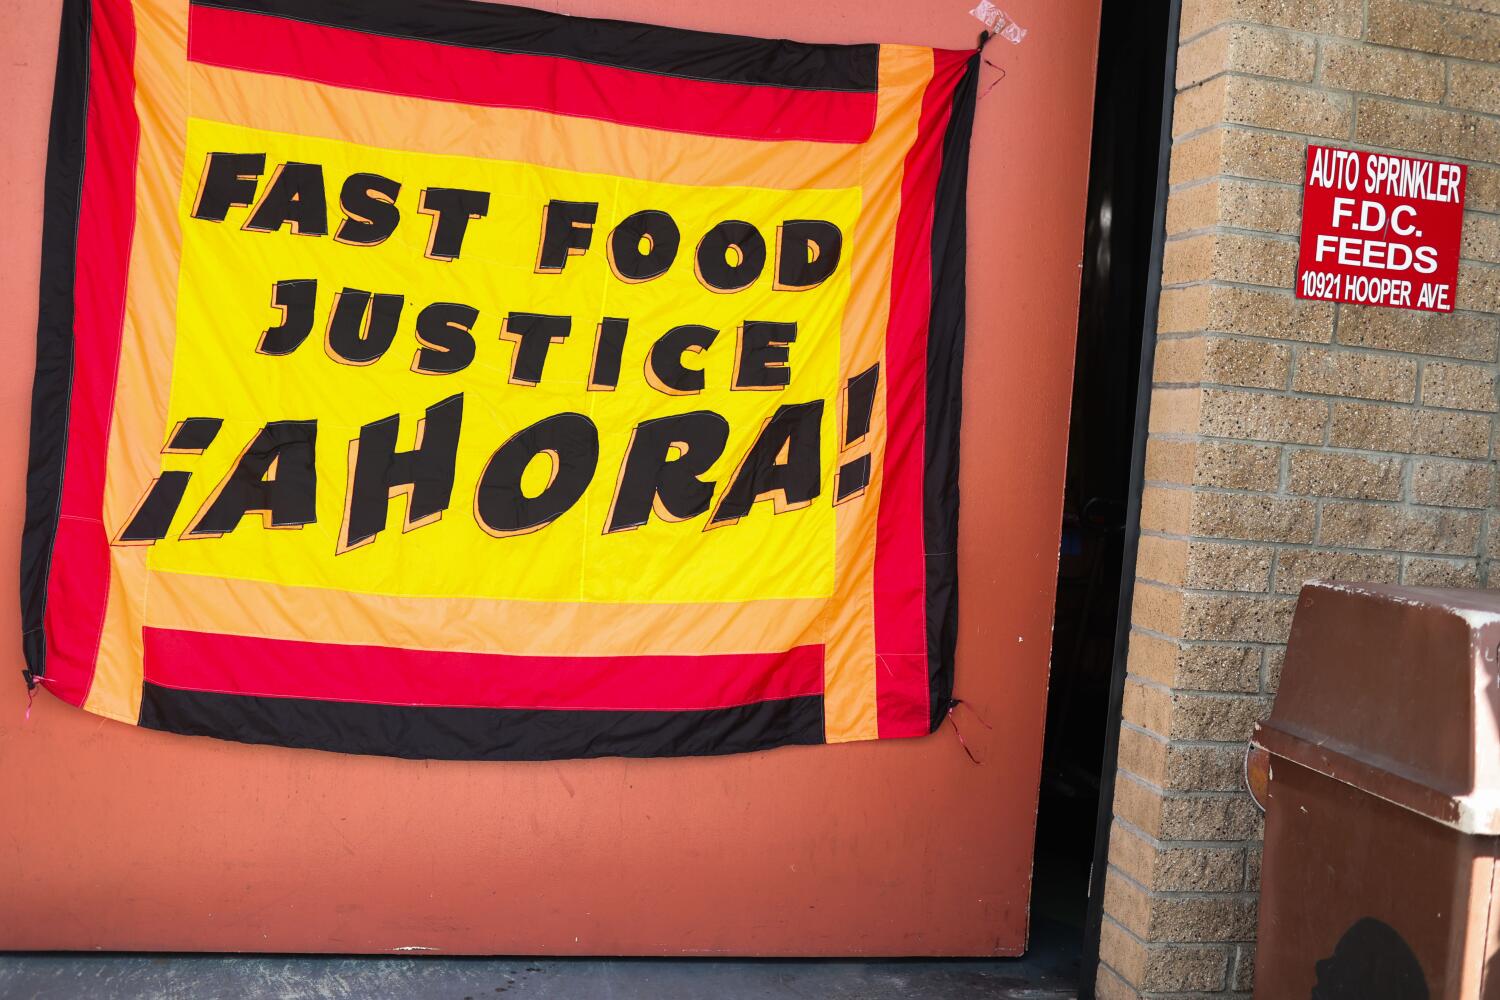 L.A. fast-food workers may get a helping hand from City Council